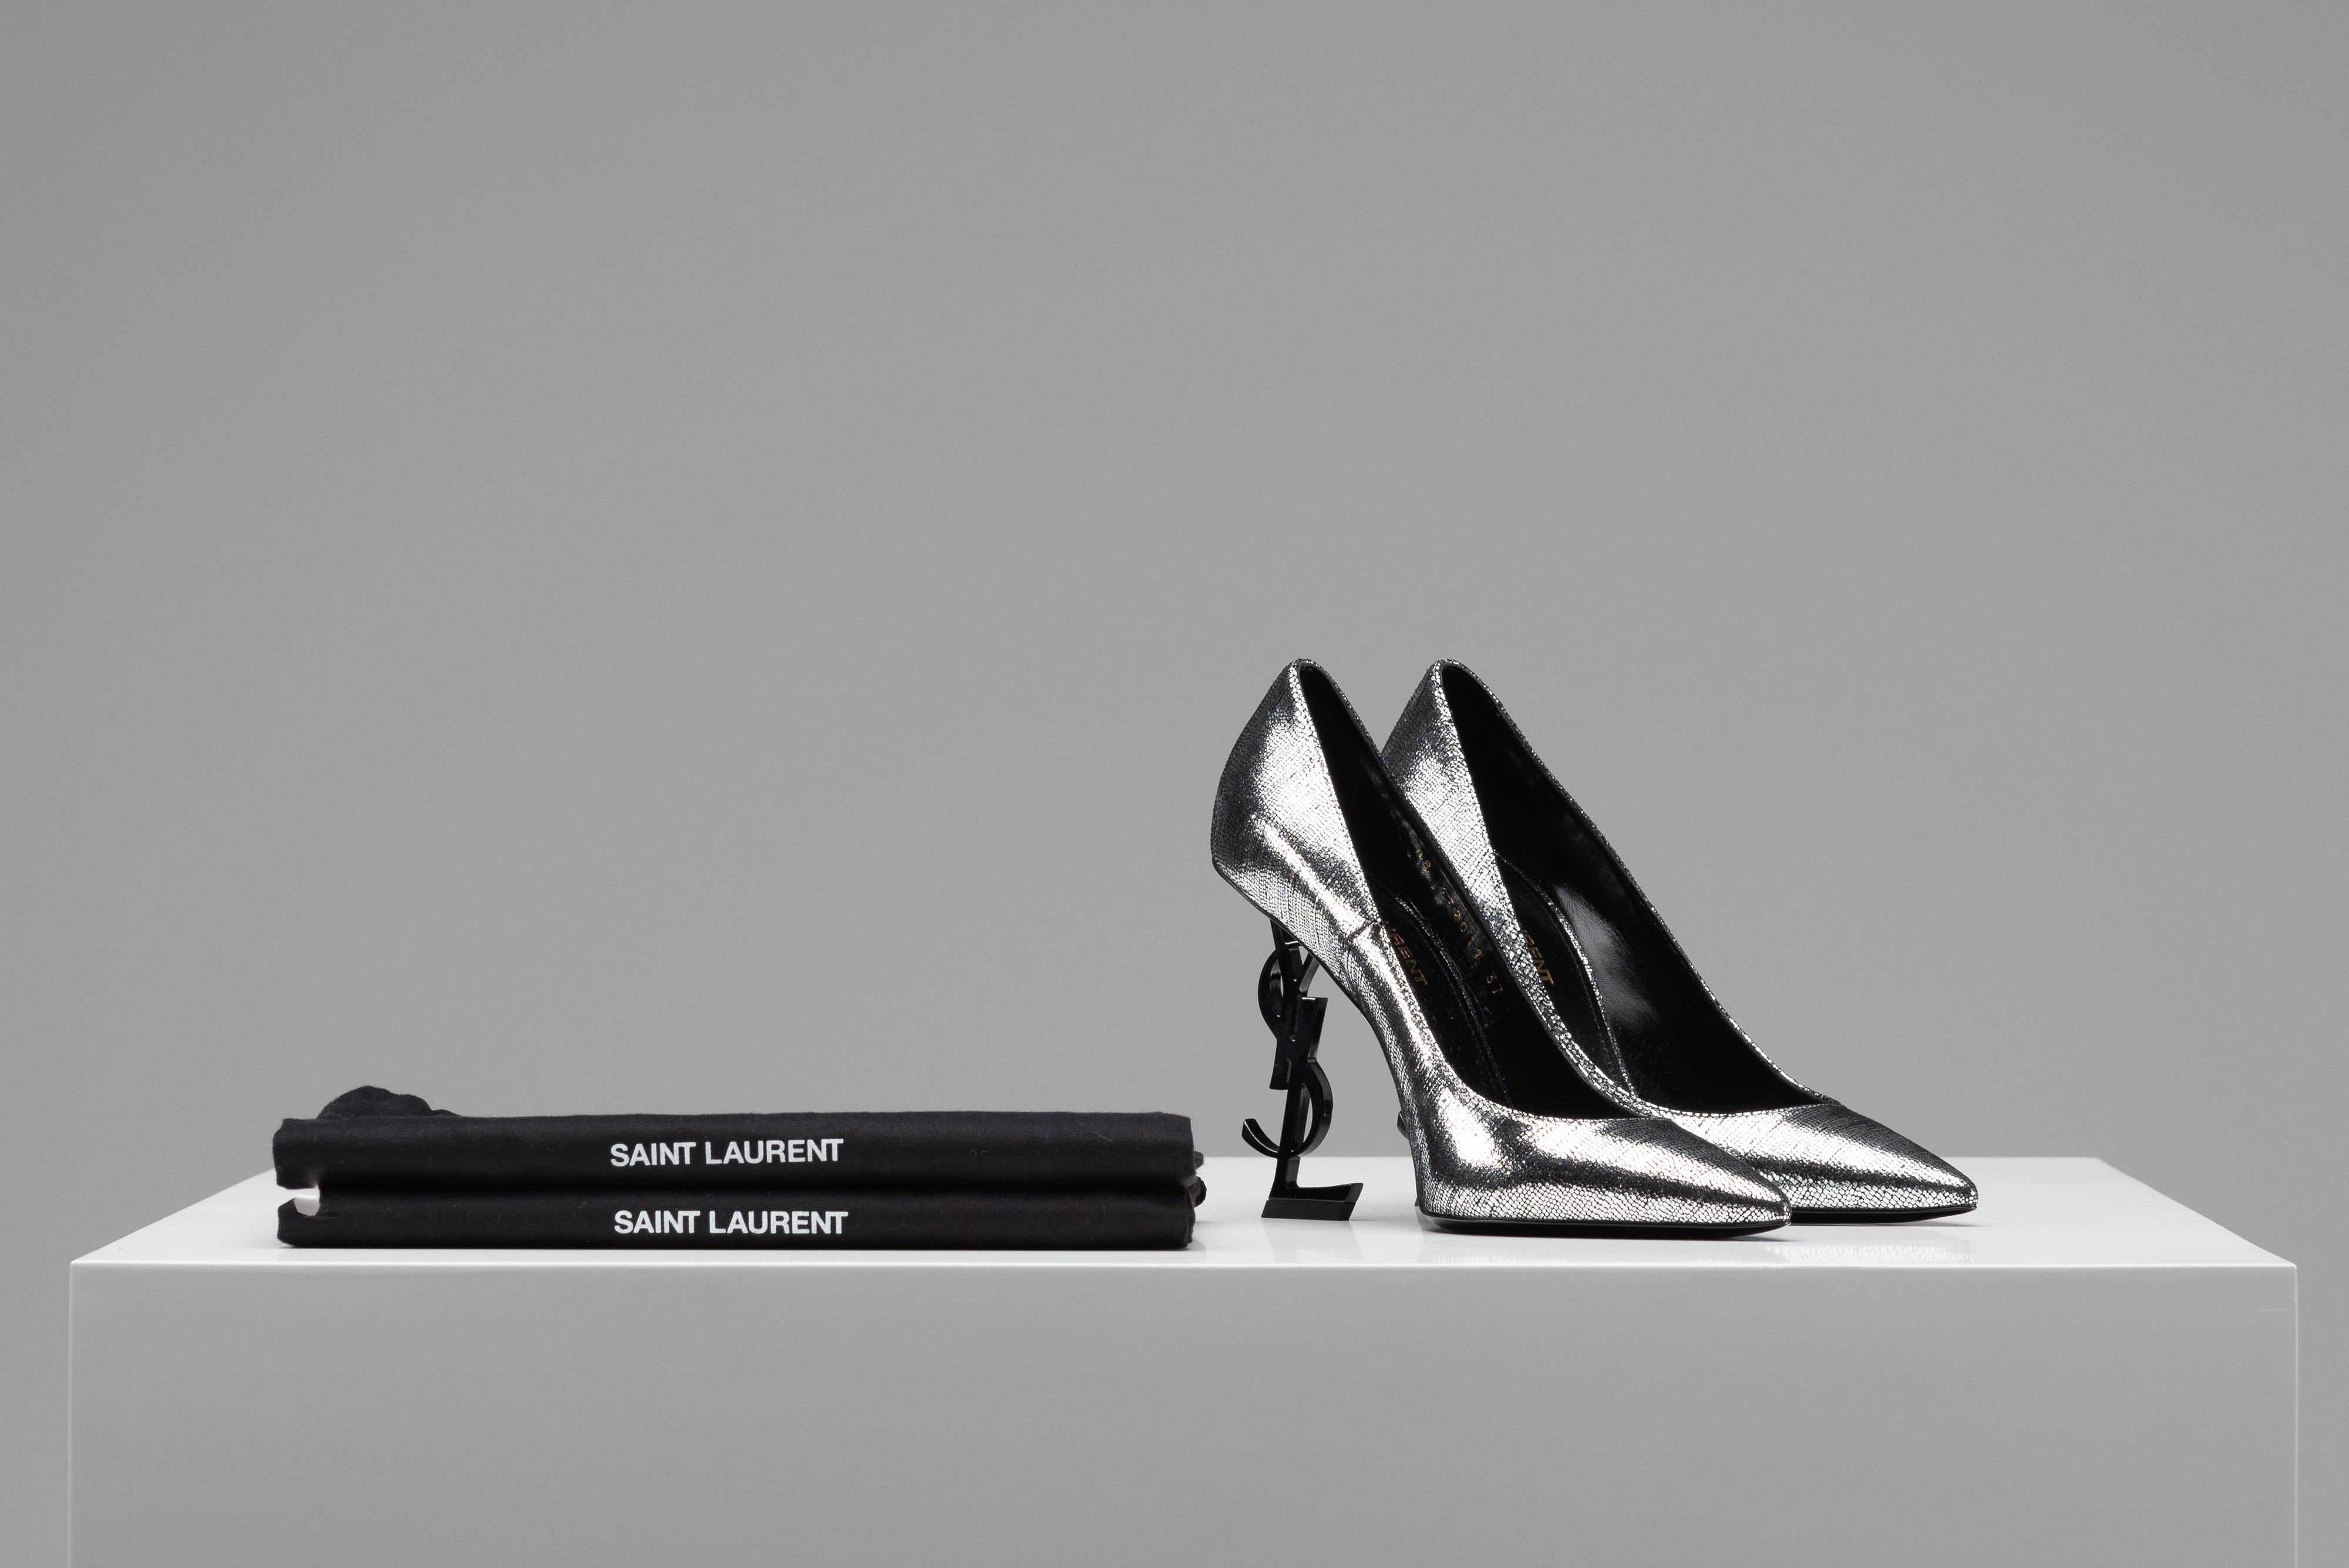 From the collection of SAVINETI we offer this pair of YSL Opyum Heels:

- Brand: YSL
- Model: Opyum Heels
- Color: Silver/ Black
- Size: 37
- Condition: Excellent Condition (as new)
- Materials: Leather
- Extras: Dustbag

Authenticity is our core